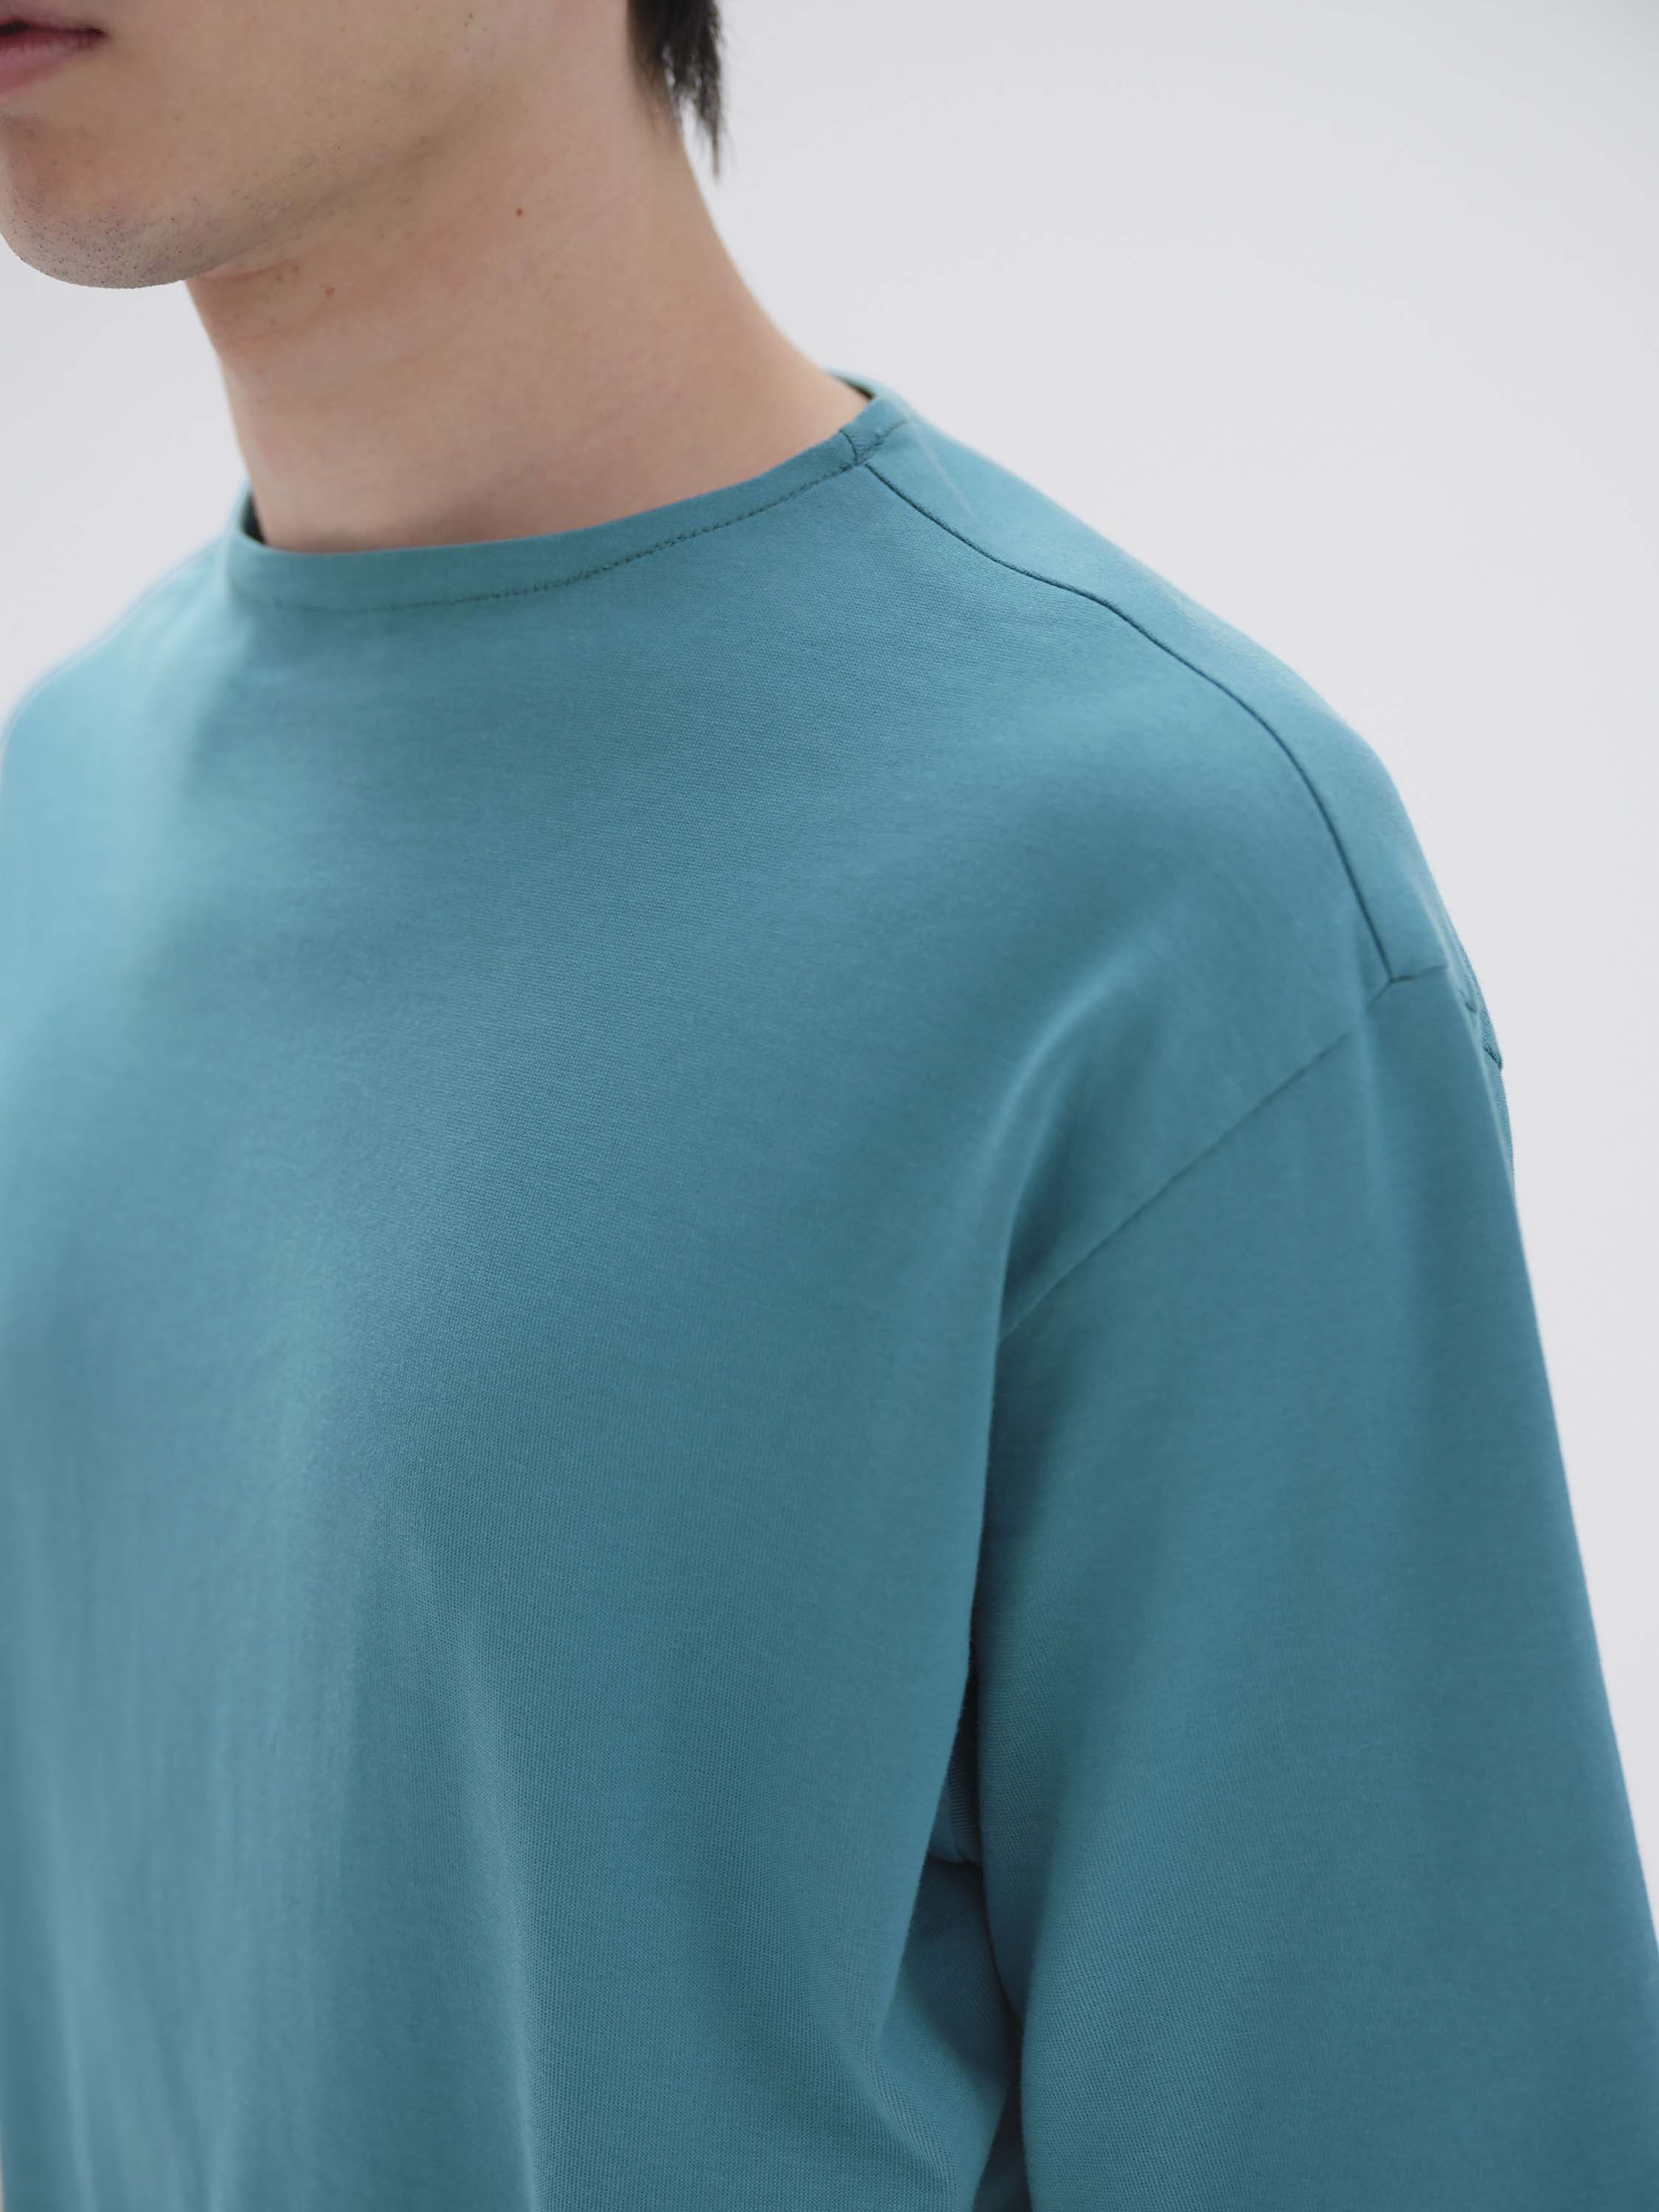 LUSTER PLAITING NARROW BOAT NECK TEE 詳細画像 TEAL GREEN 2